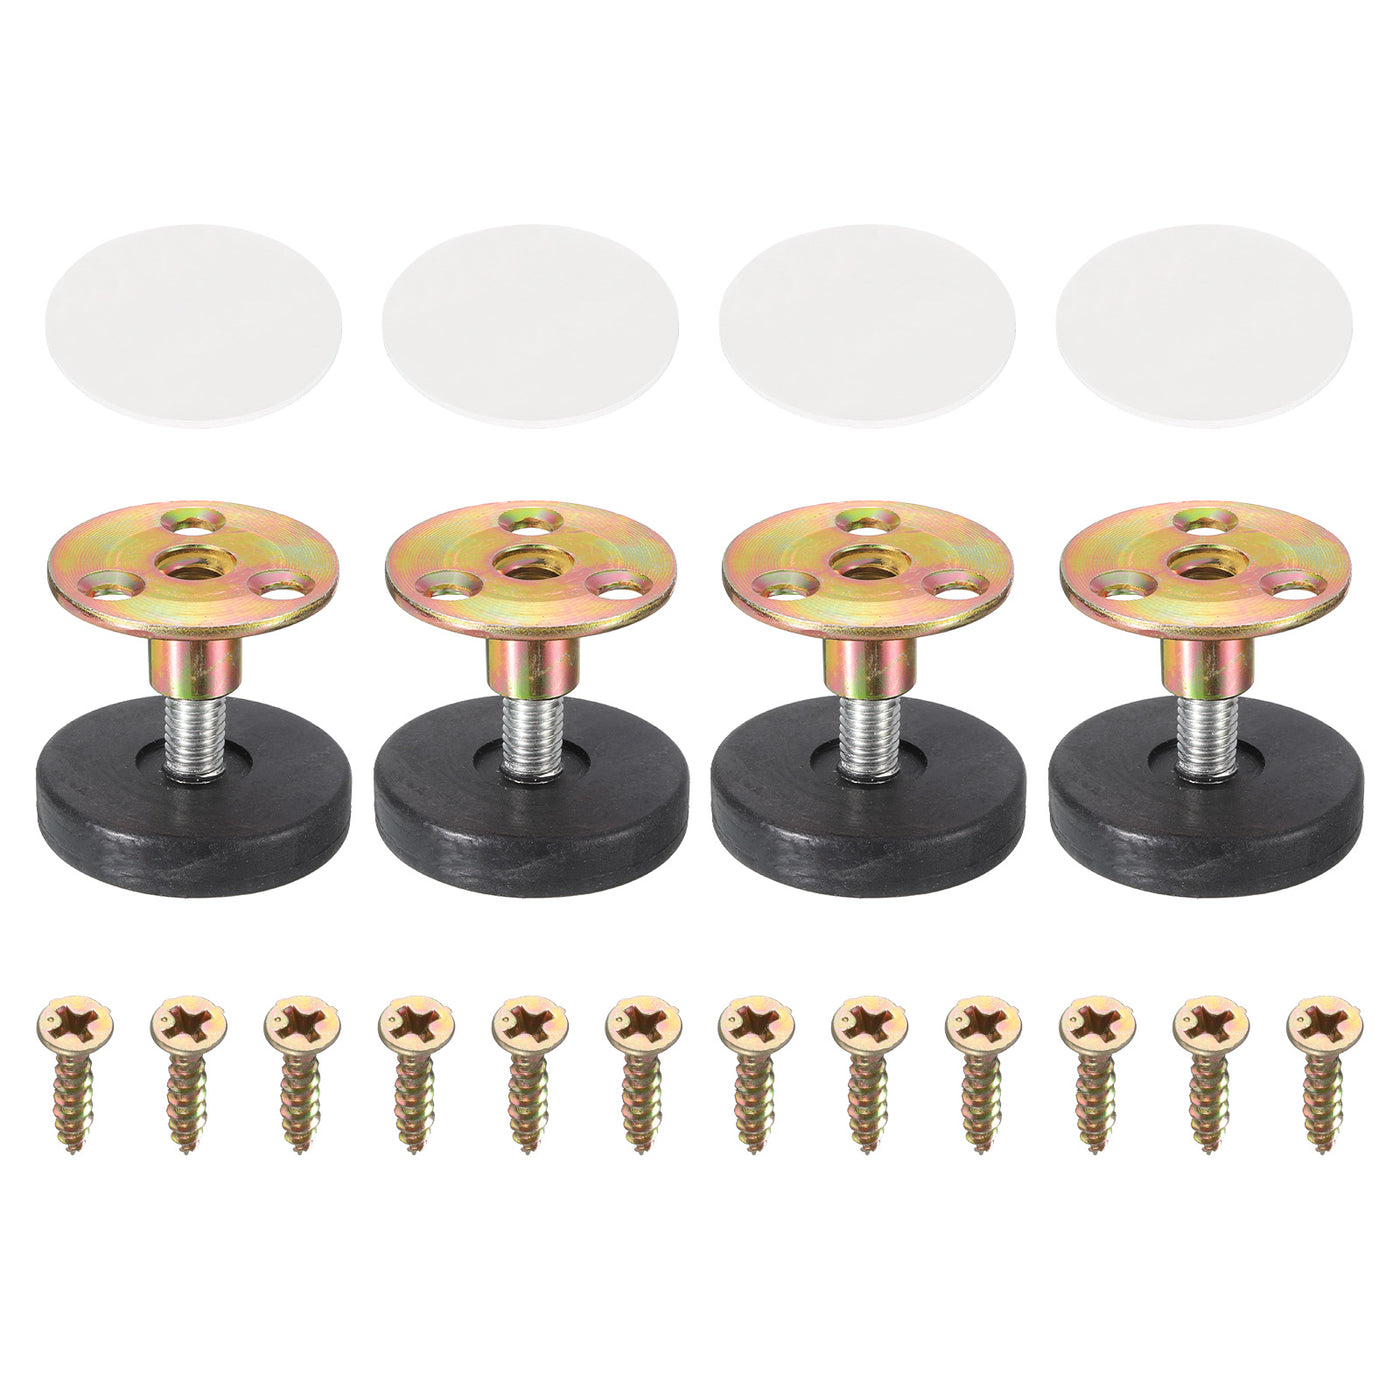 uxcell Uxcell Thread Furniture Leveling Feet, 4Pcs - Adjustable Furniture Feet Levelers, Self-adhesive Threaded Screw-in Raised Base for Table Sofas (40 x 9 MM)